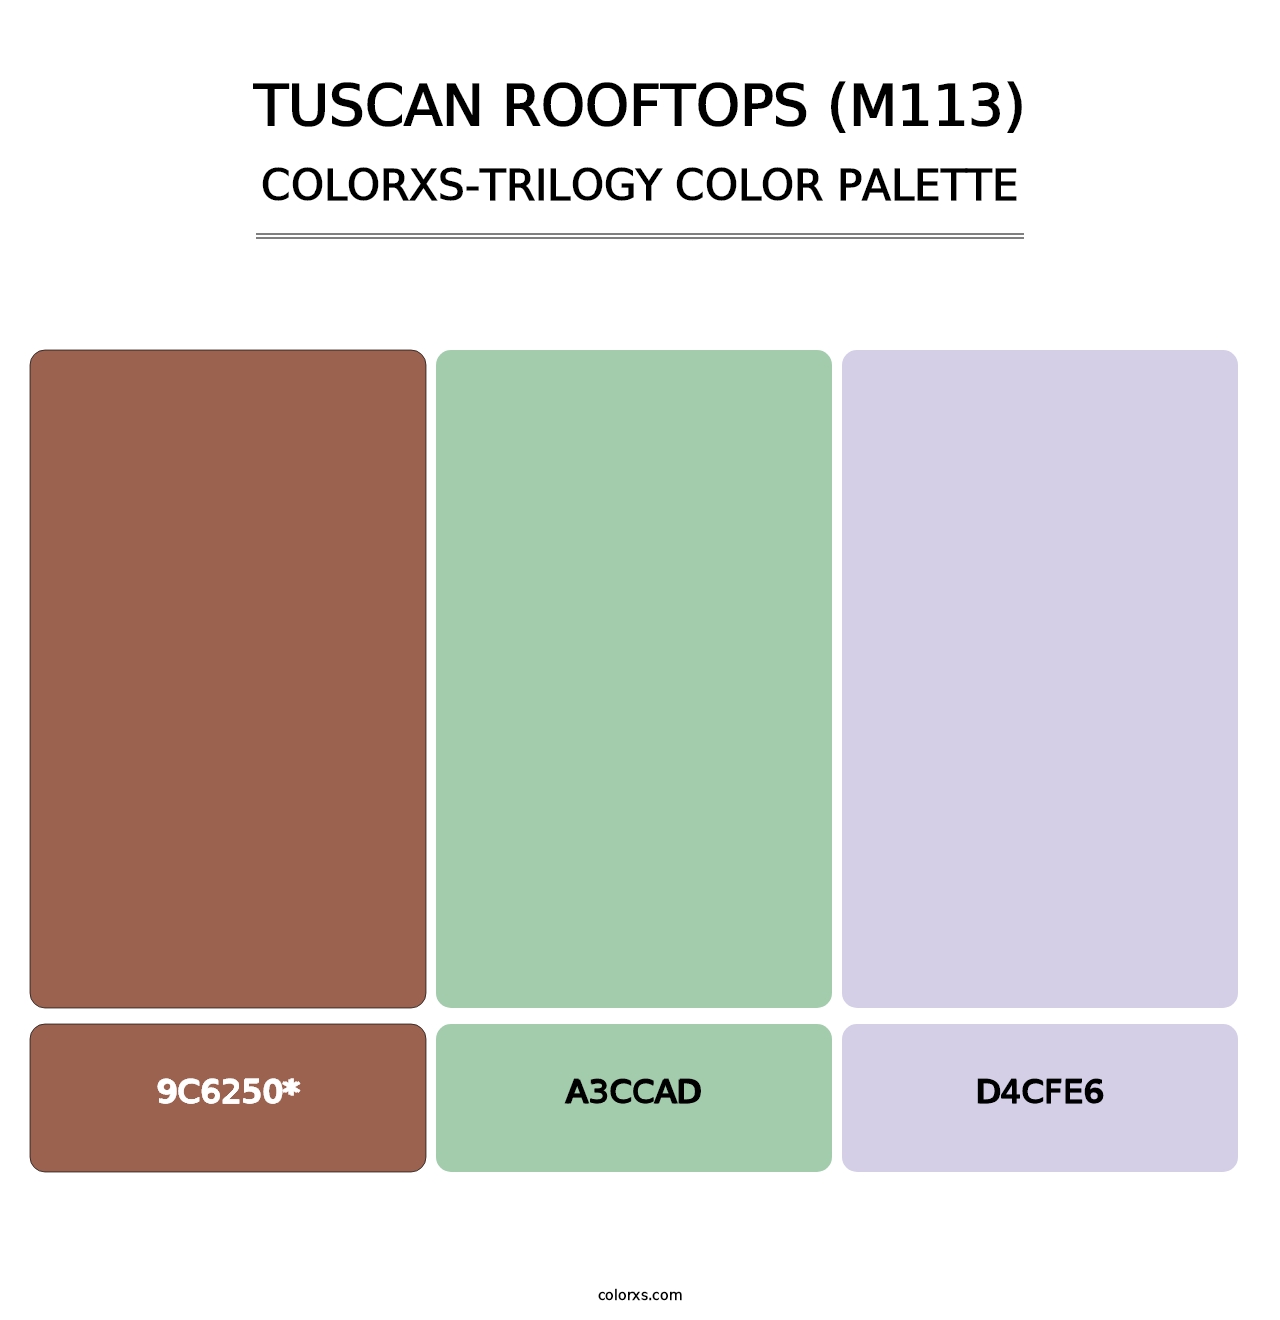 Tuscan Rooftops (M113) - Colorxs Trilogy Palette